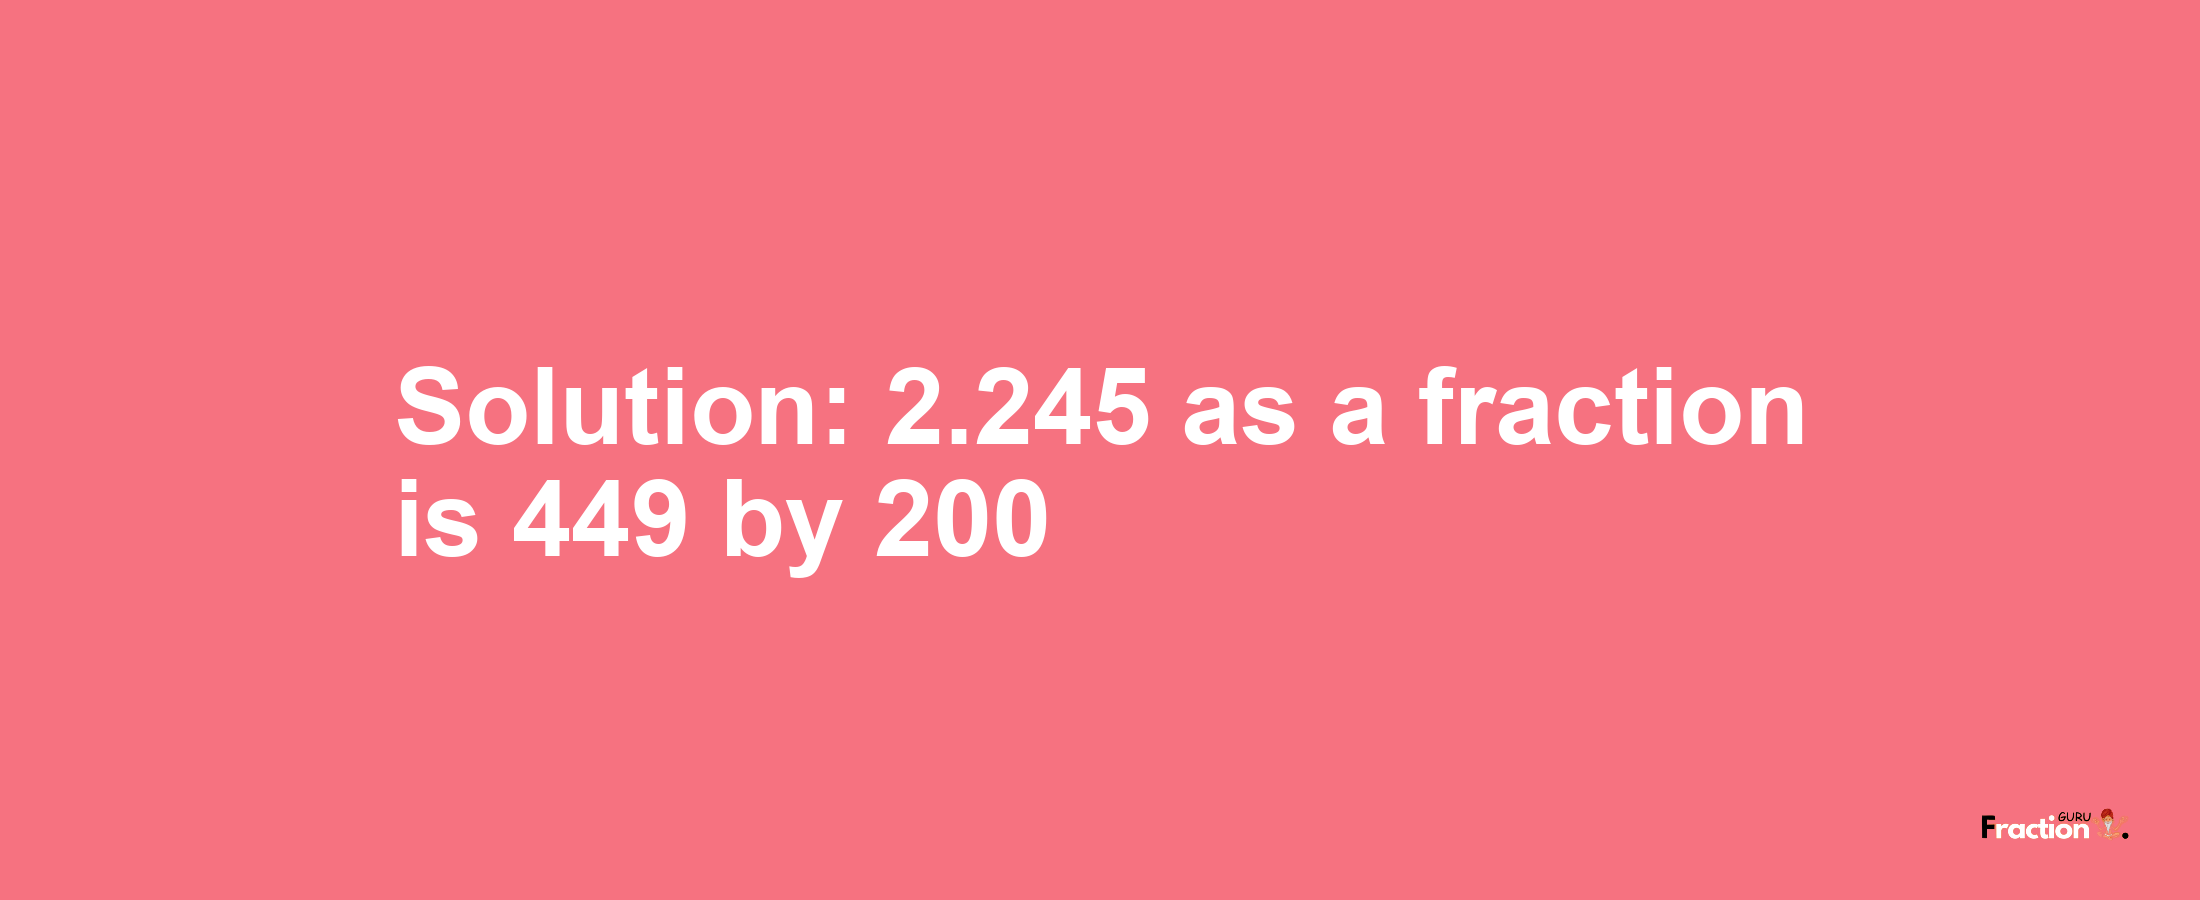 Solution:2.245 as a fraction is 449/200